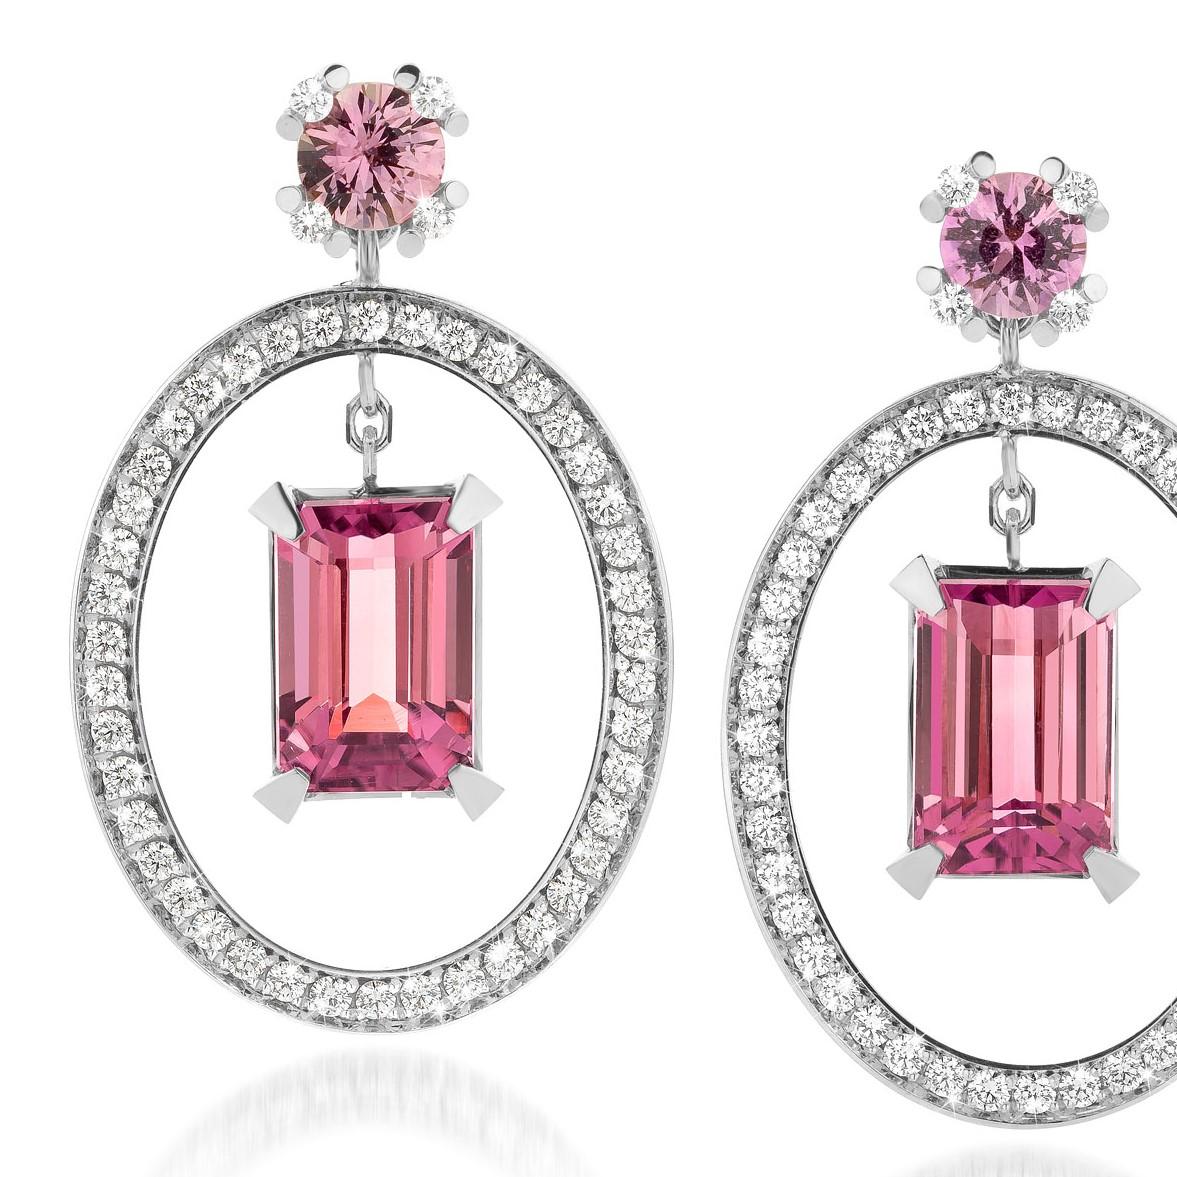 Brilliant Cut Cober “Tourmalines” with 4.14 Carat Tourmalines, Diamonds and Sapphires Earrings For Sale